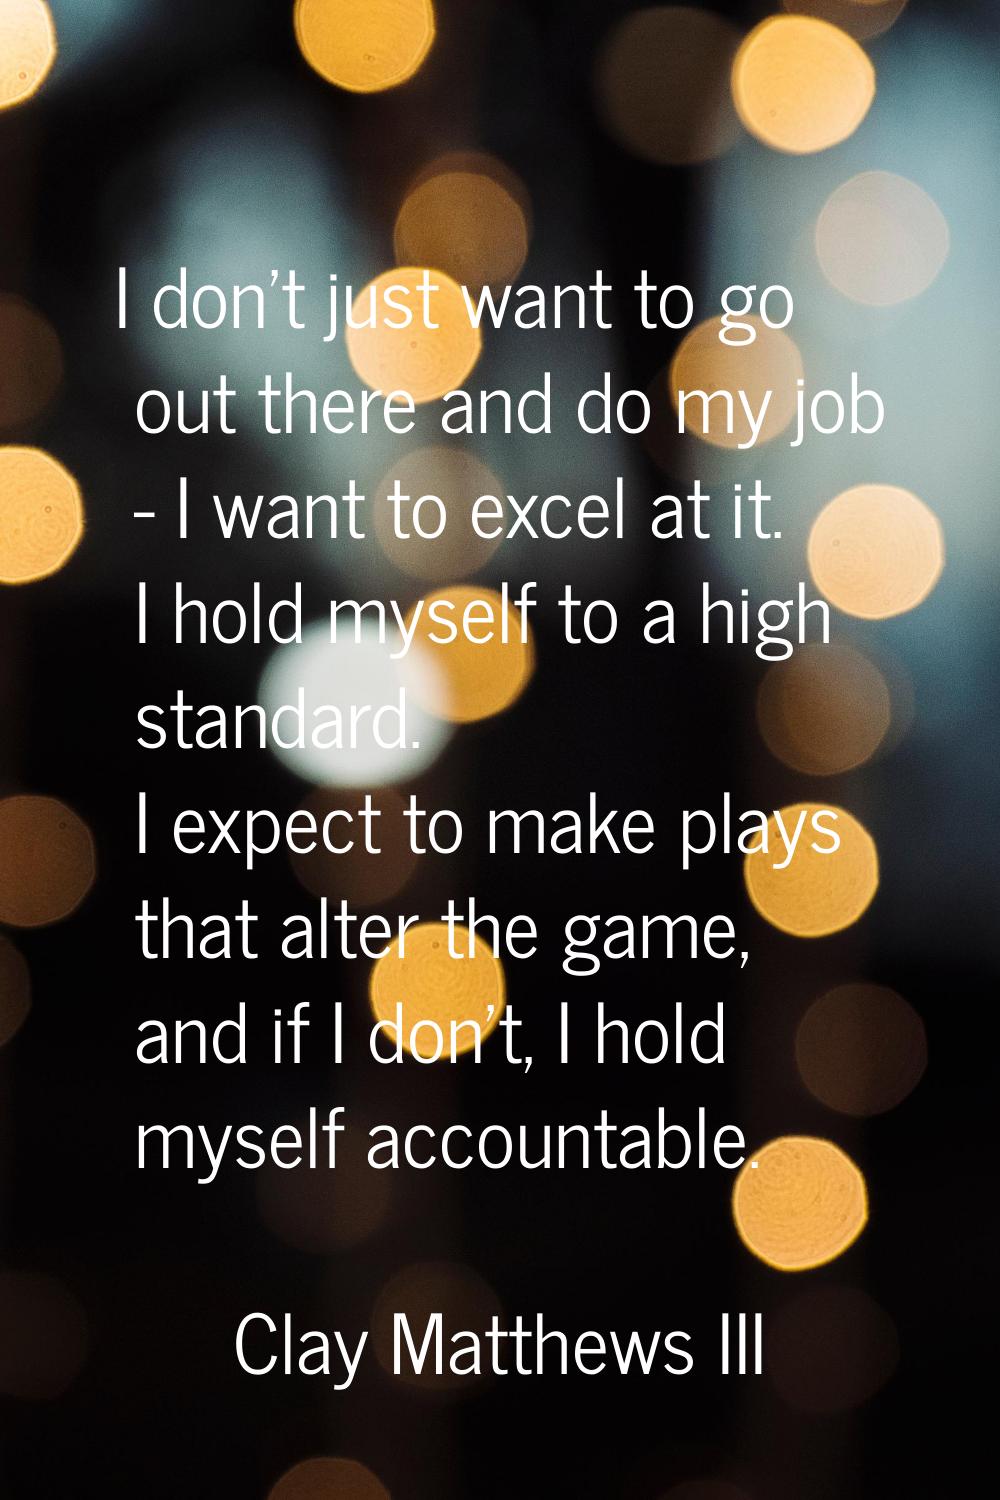 I don't just want to go out there and do my job - I want to excel at it. I hold myself to a high st